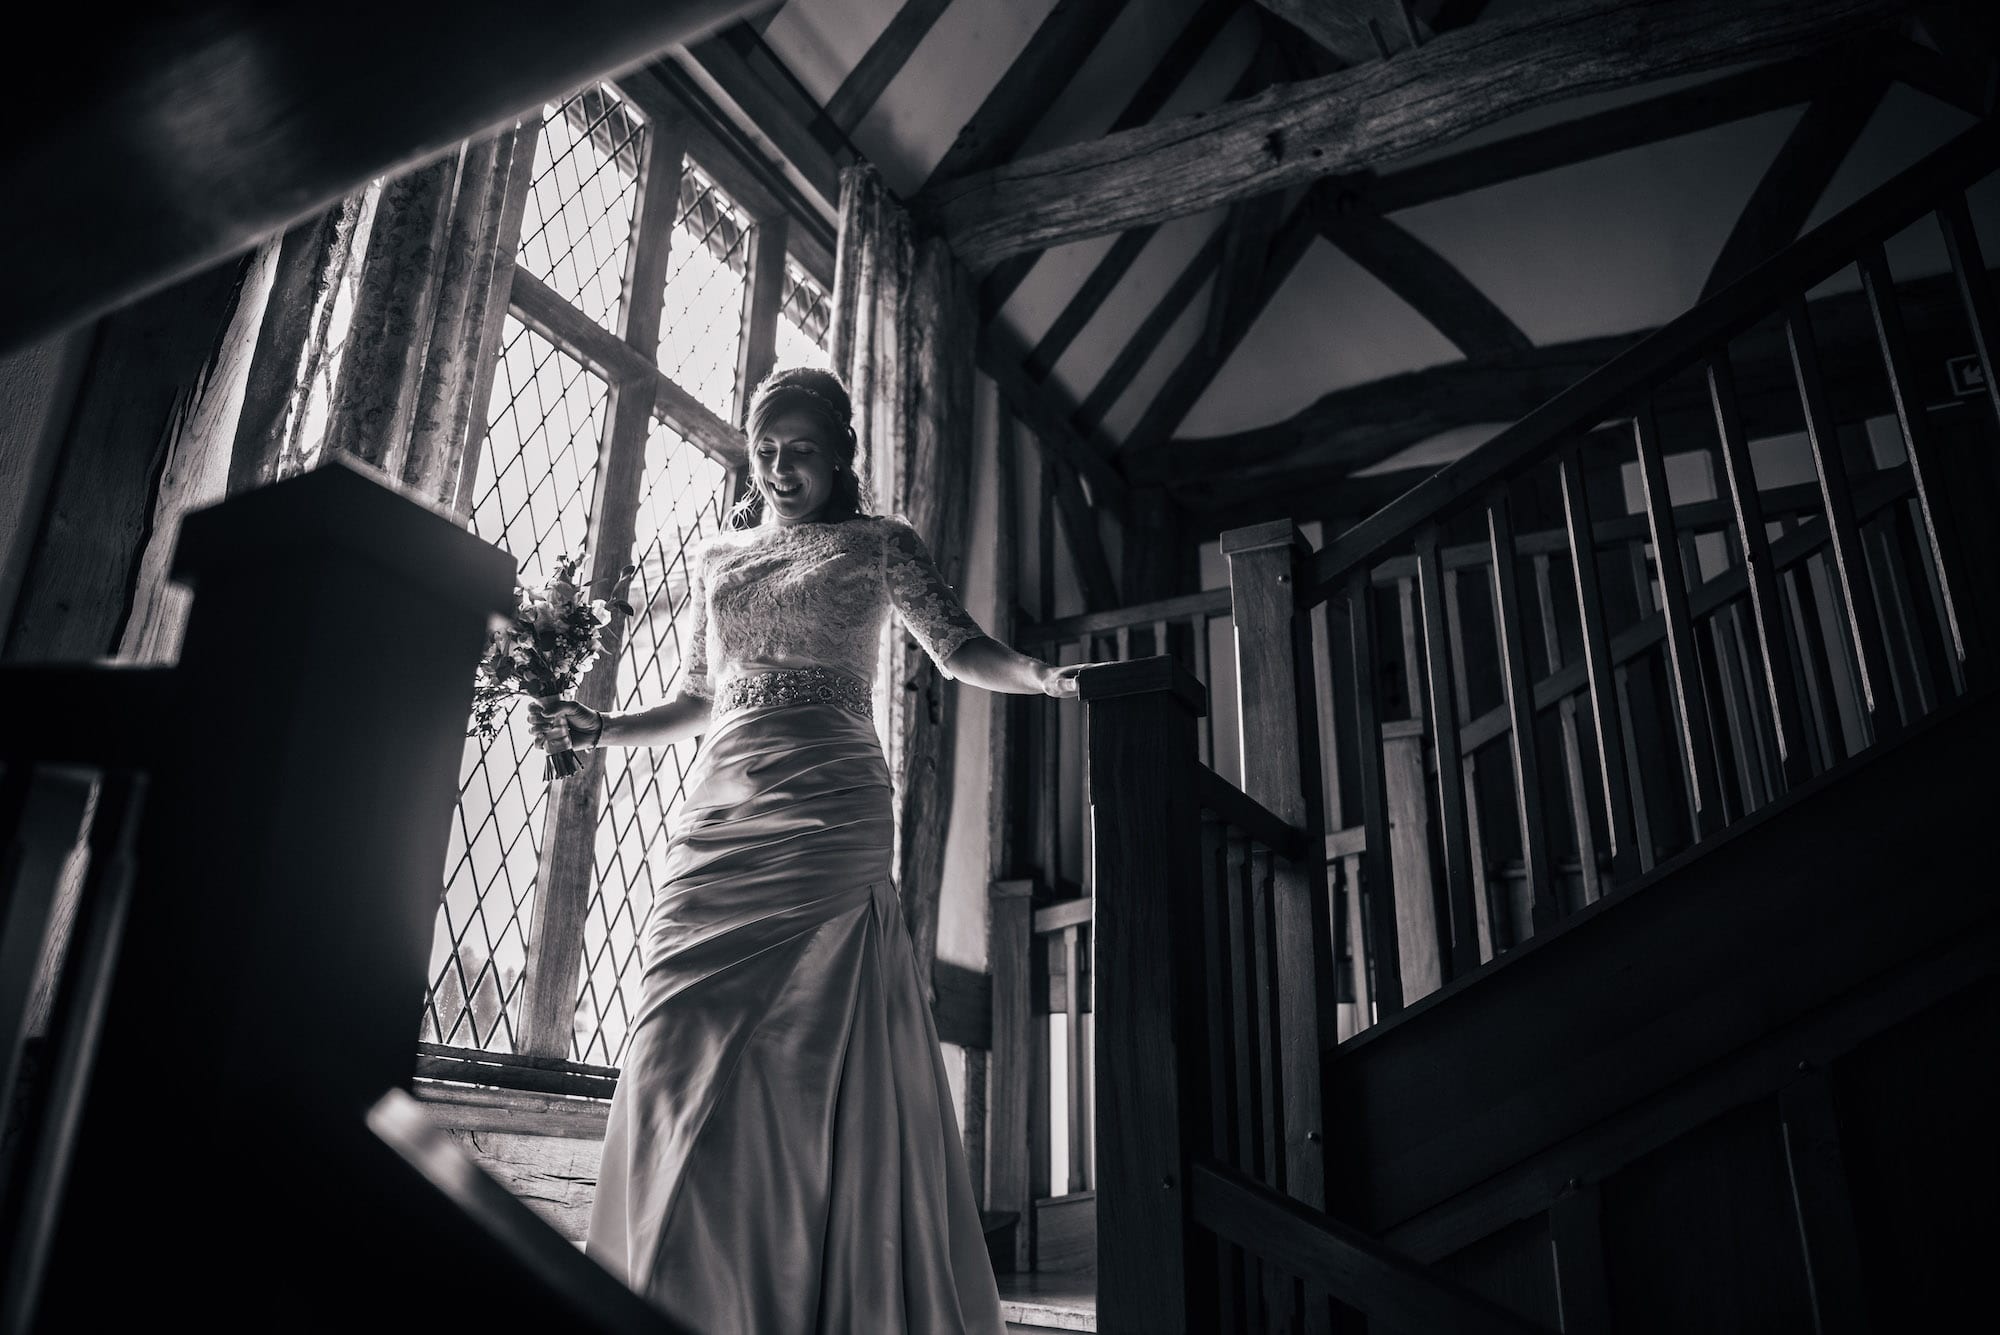 Cain Manor bridal staircase wedding dress reveal